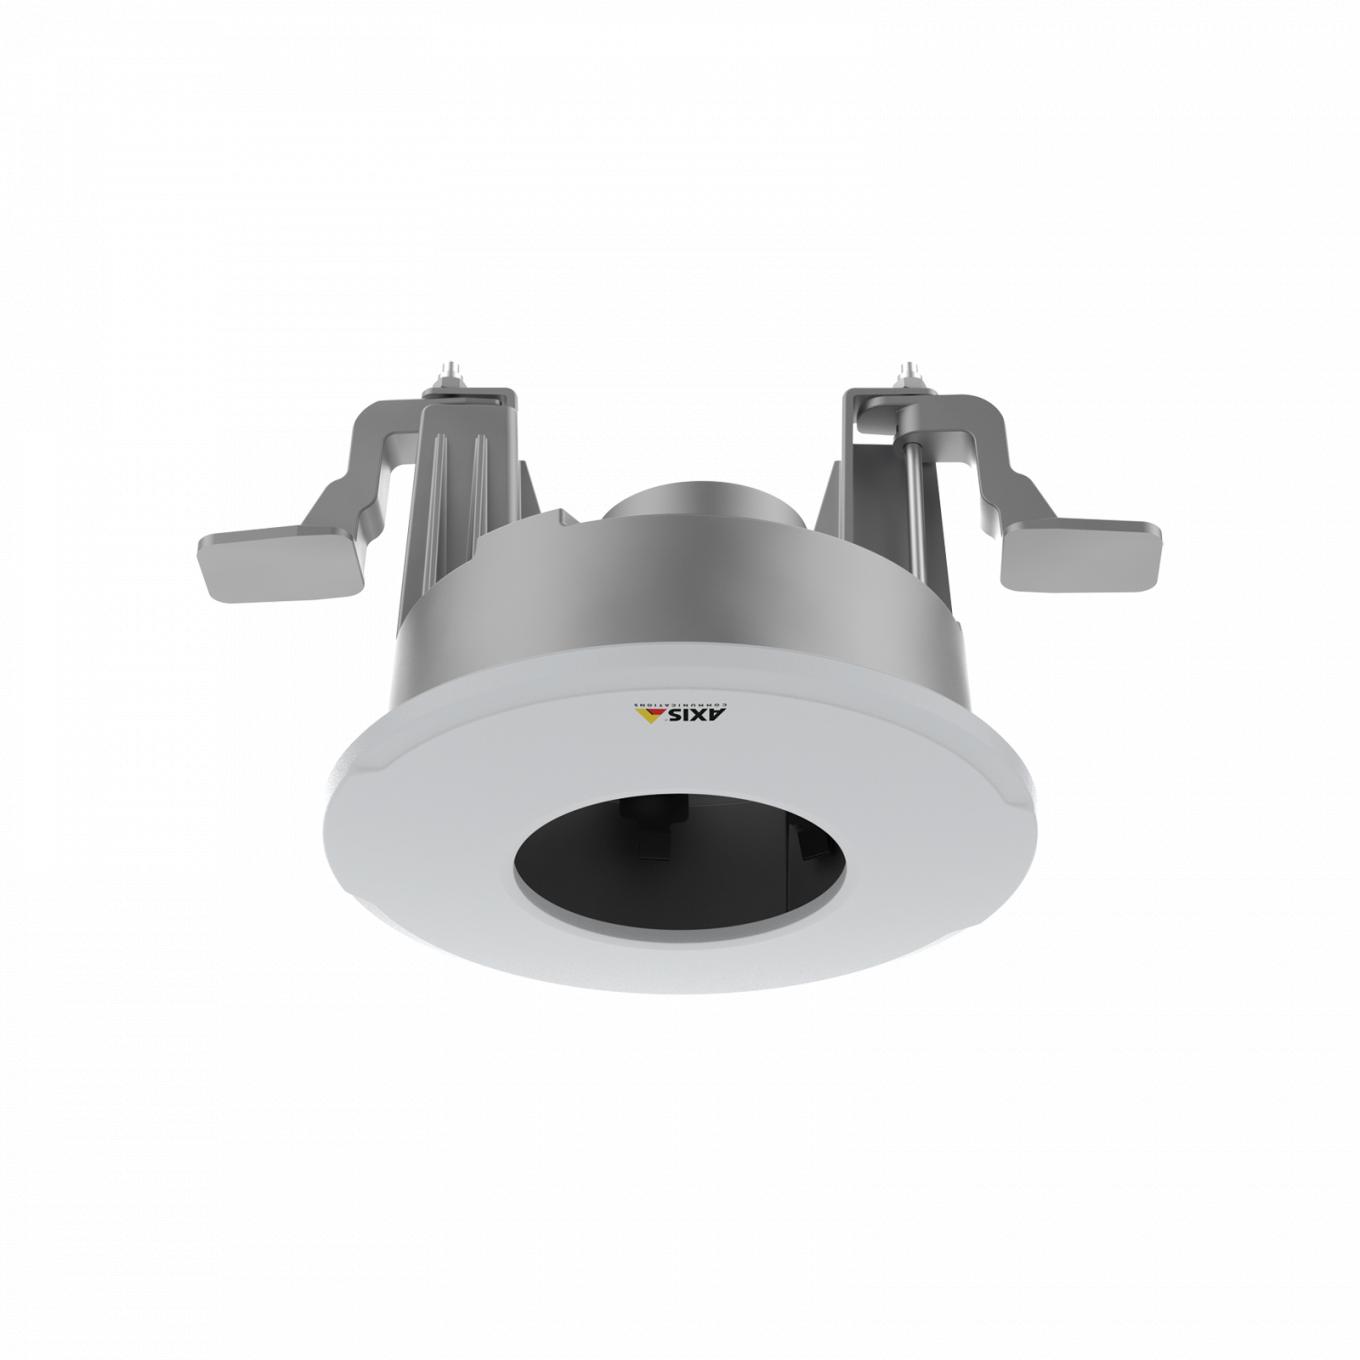 AXIS TM3207 Plenum Recessed Mount, viewed from its front